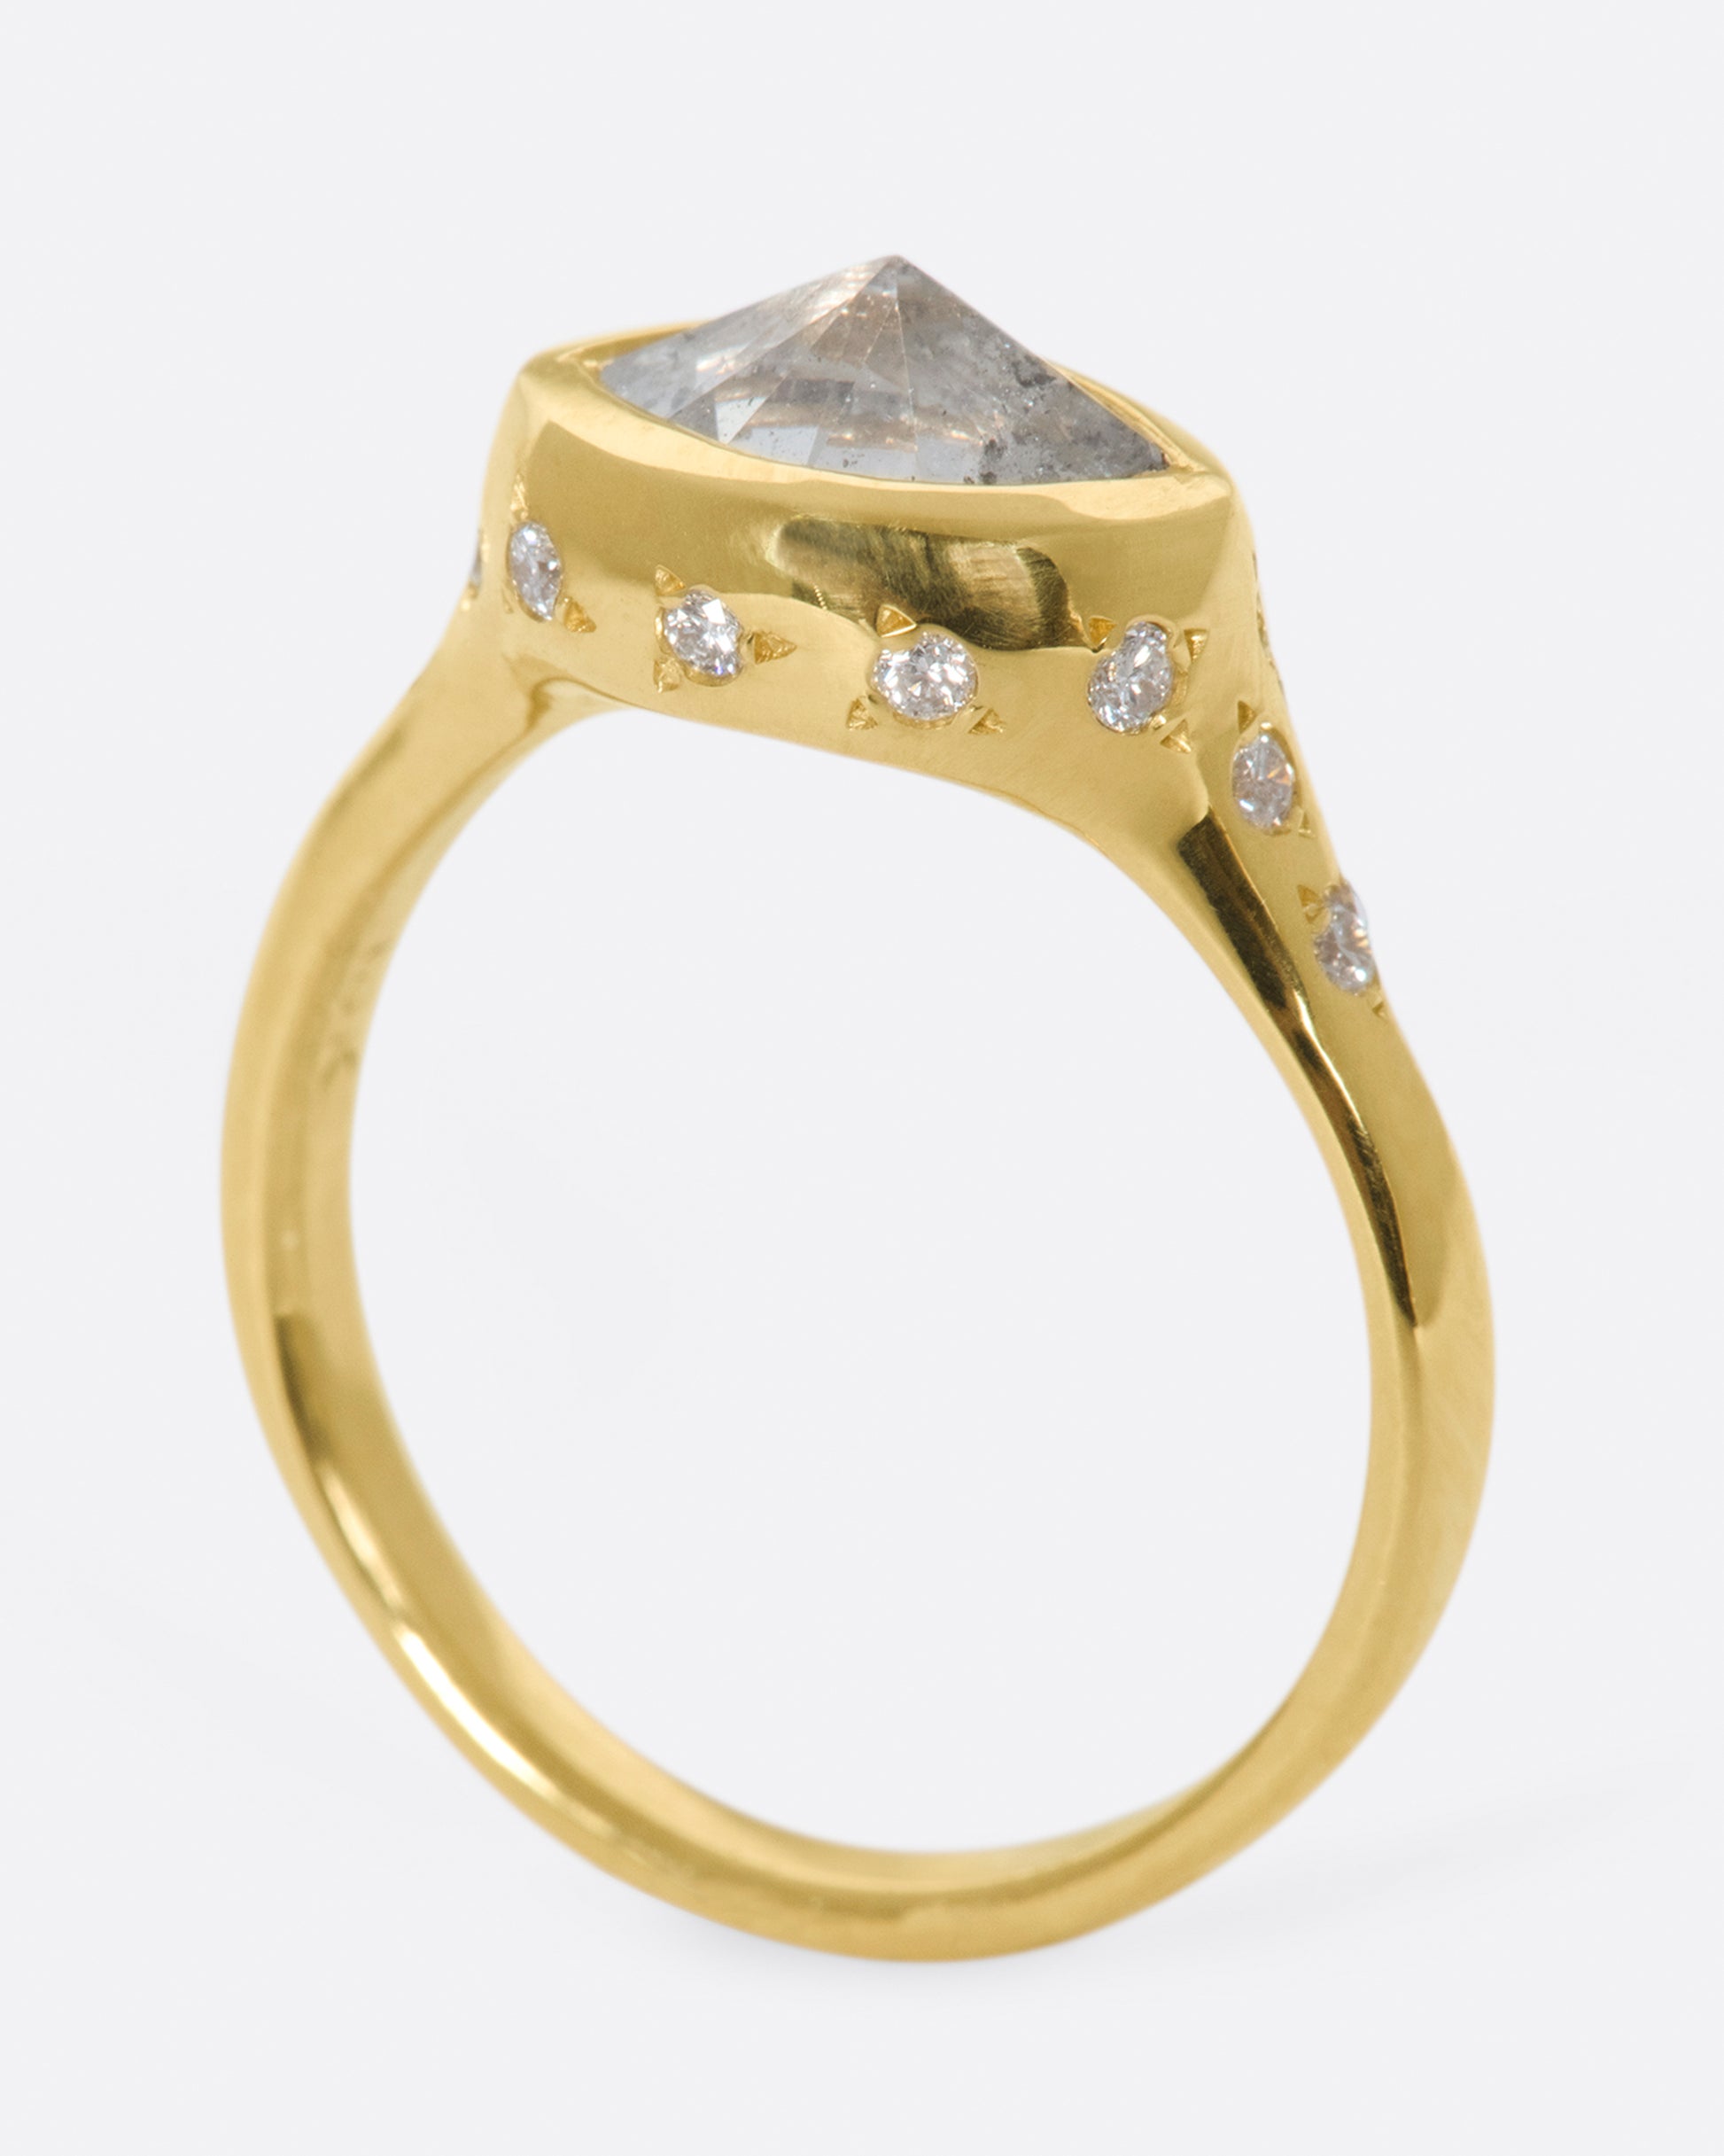 This ring is made extra special by the inverted, east-west diamond at its center.